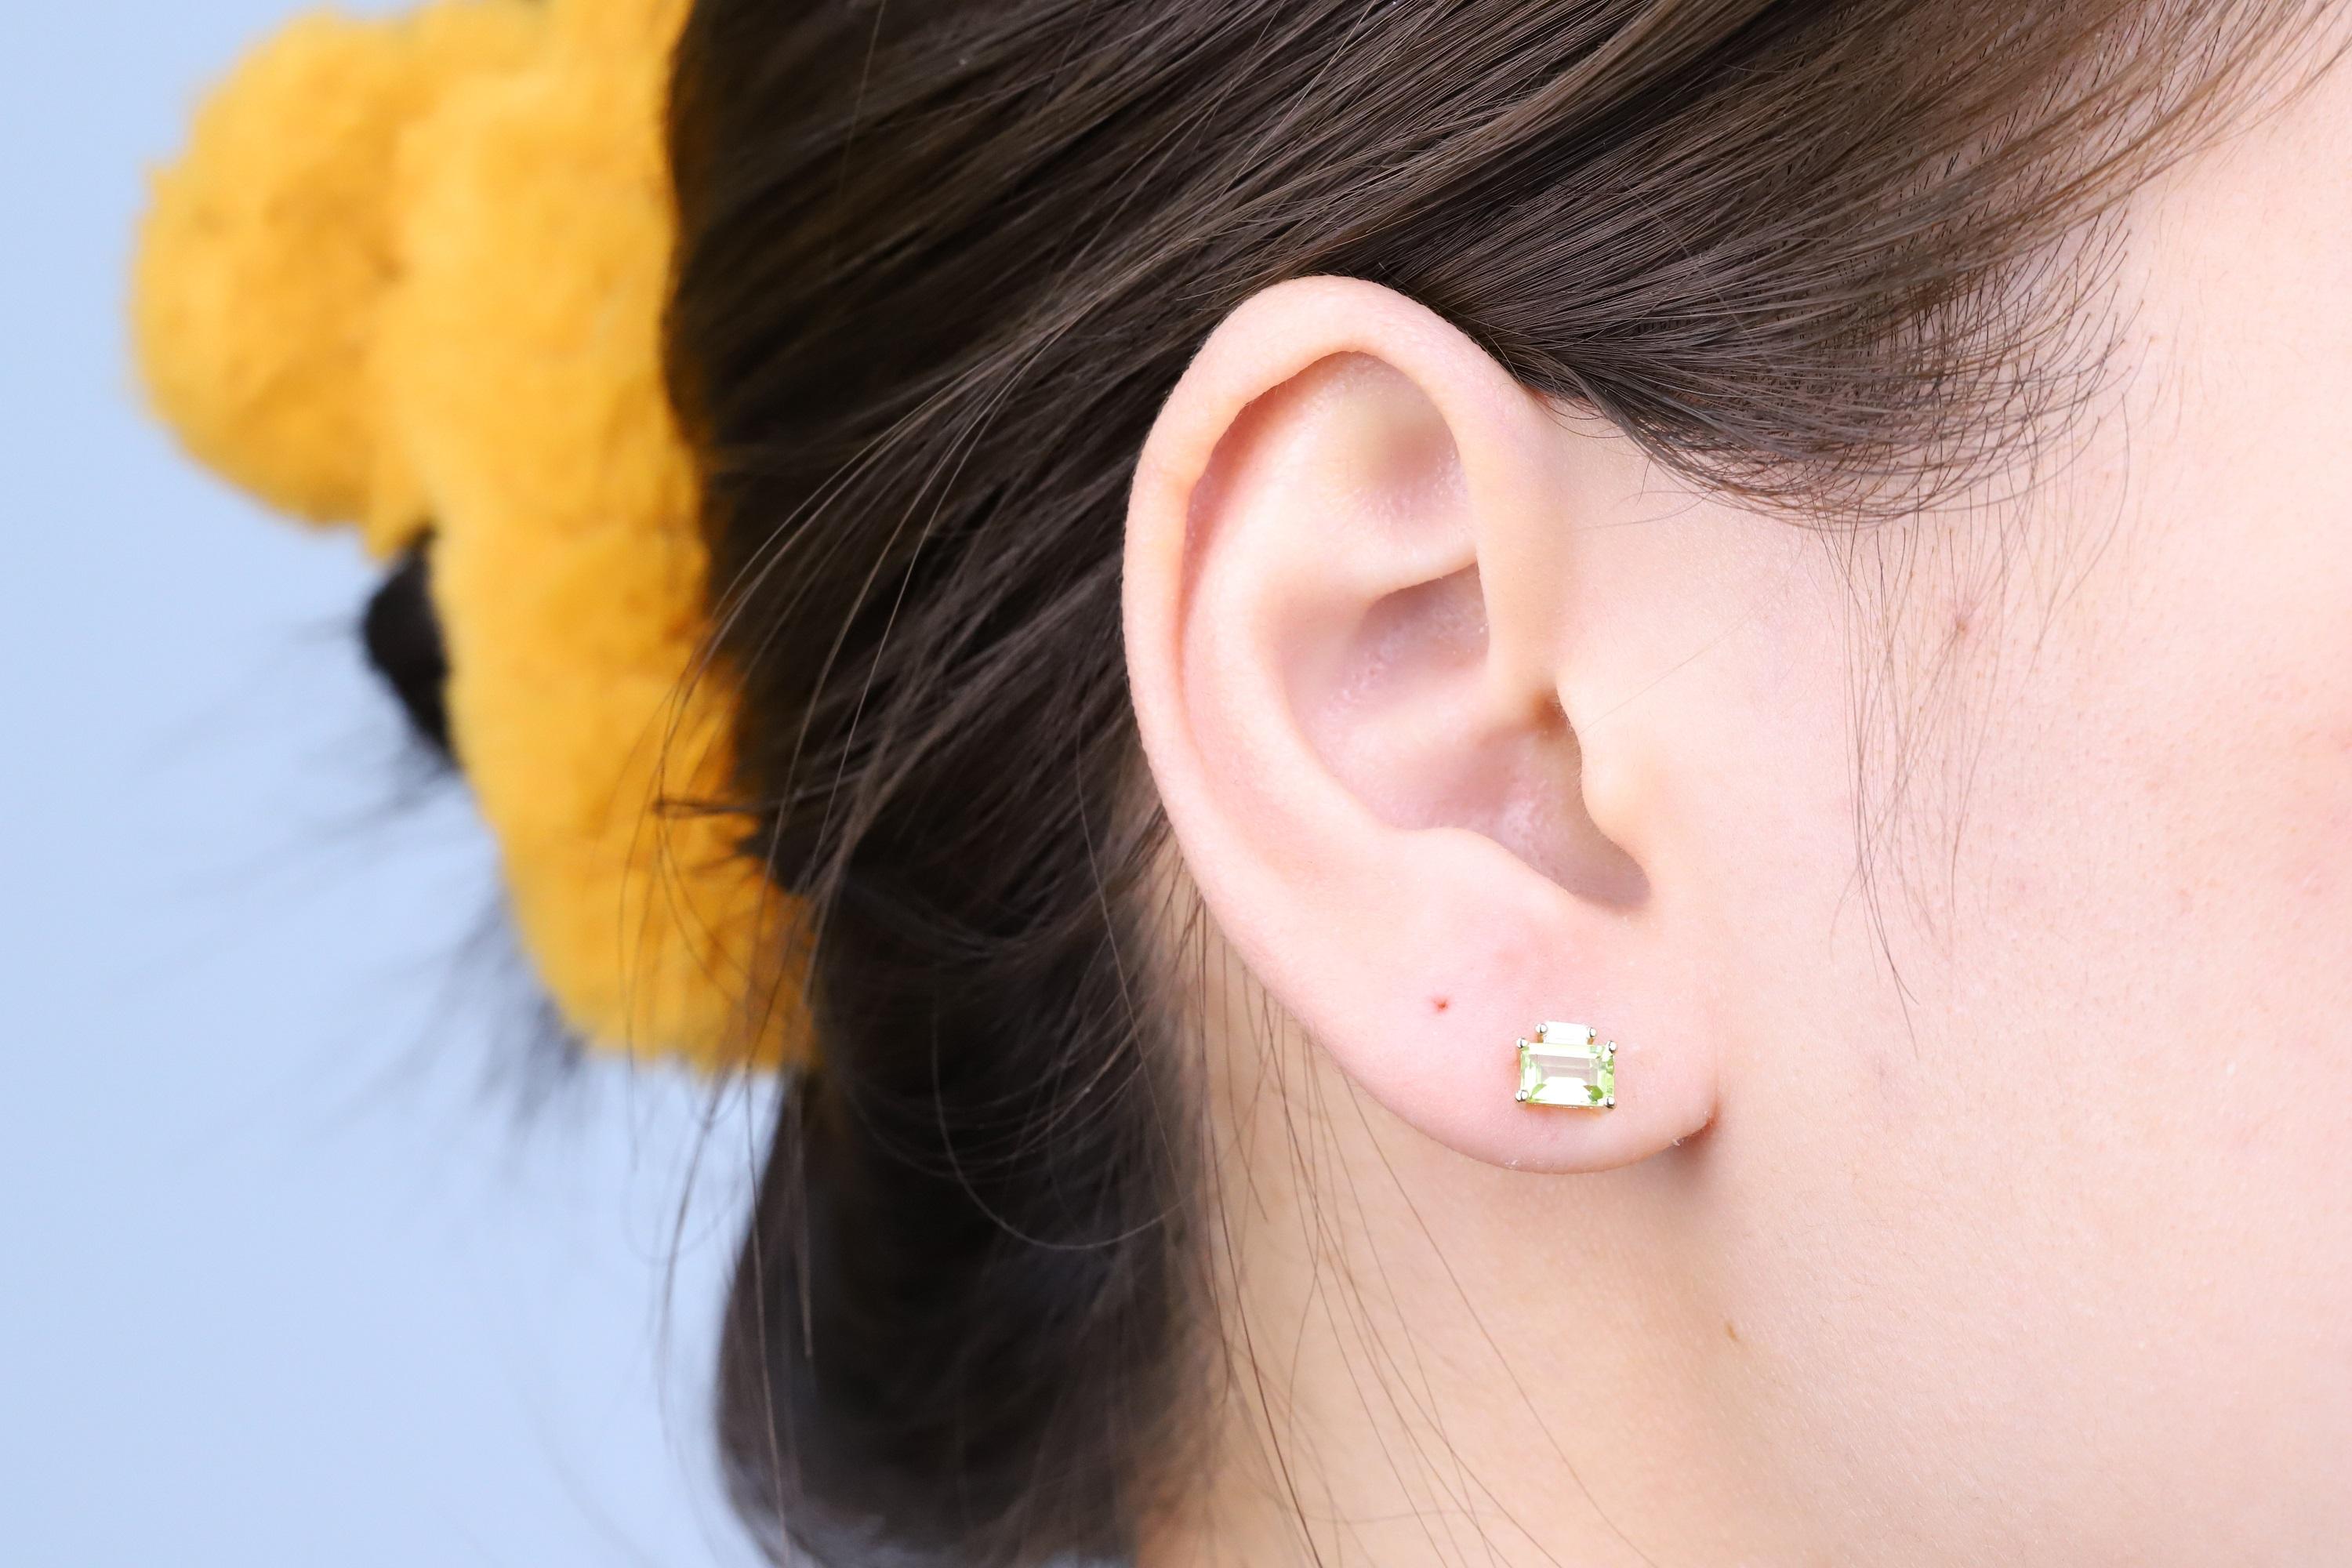 Decorate yourself in elegance with this Earring is crafted from 10-karat Yellow Gold by Gin & Grace Earring. This Earring is made up of 6x4 Emerald-cut (2 pcs) 1.23 carat Peridot and Baguette-cut White Diamond (2 pcs) 0.10 carat. This Earring is